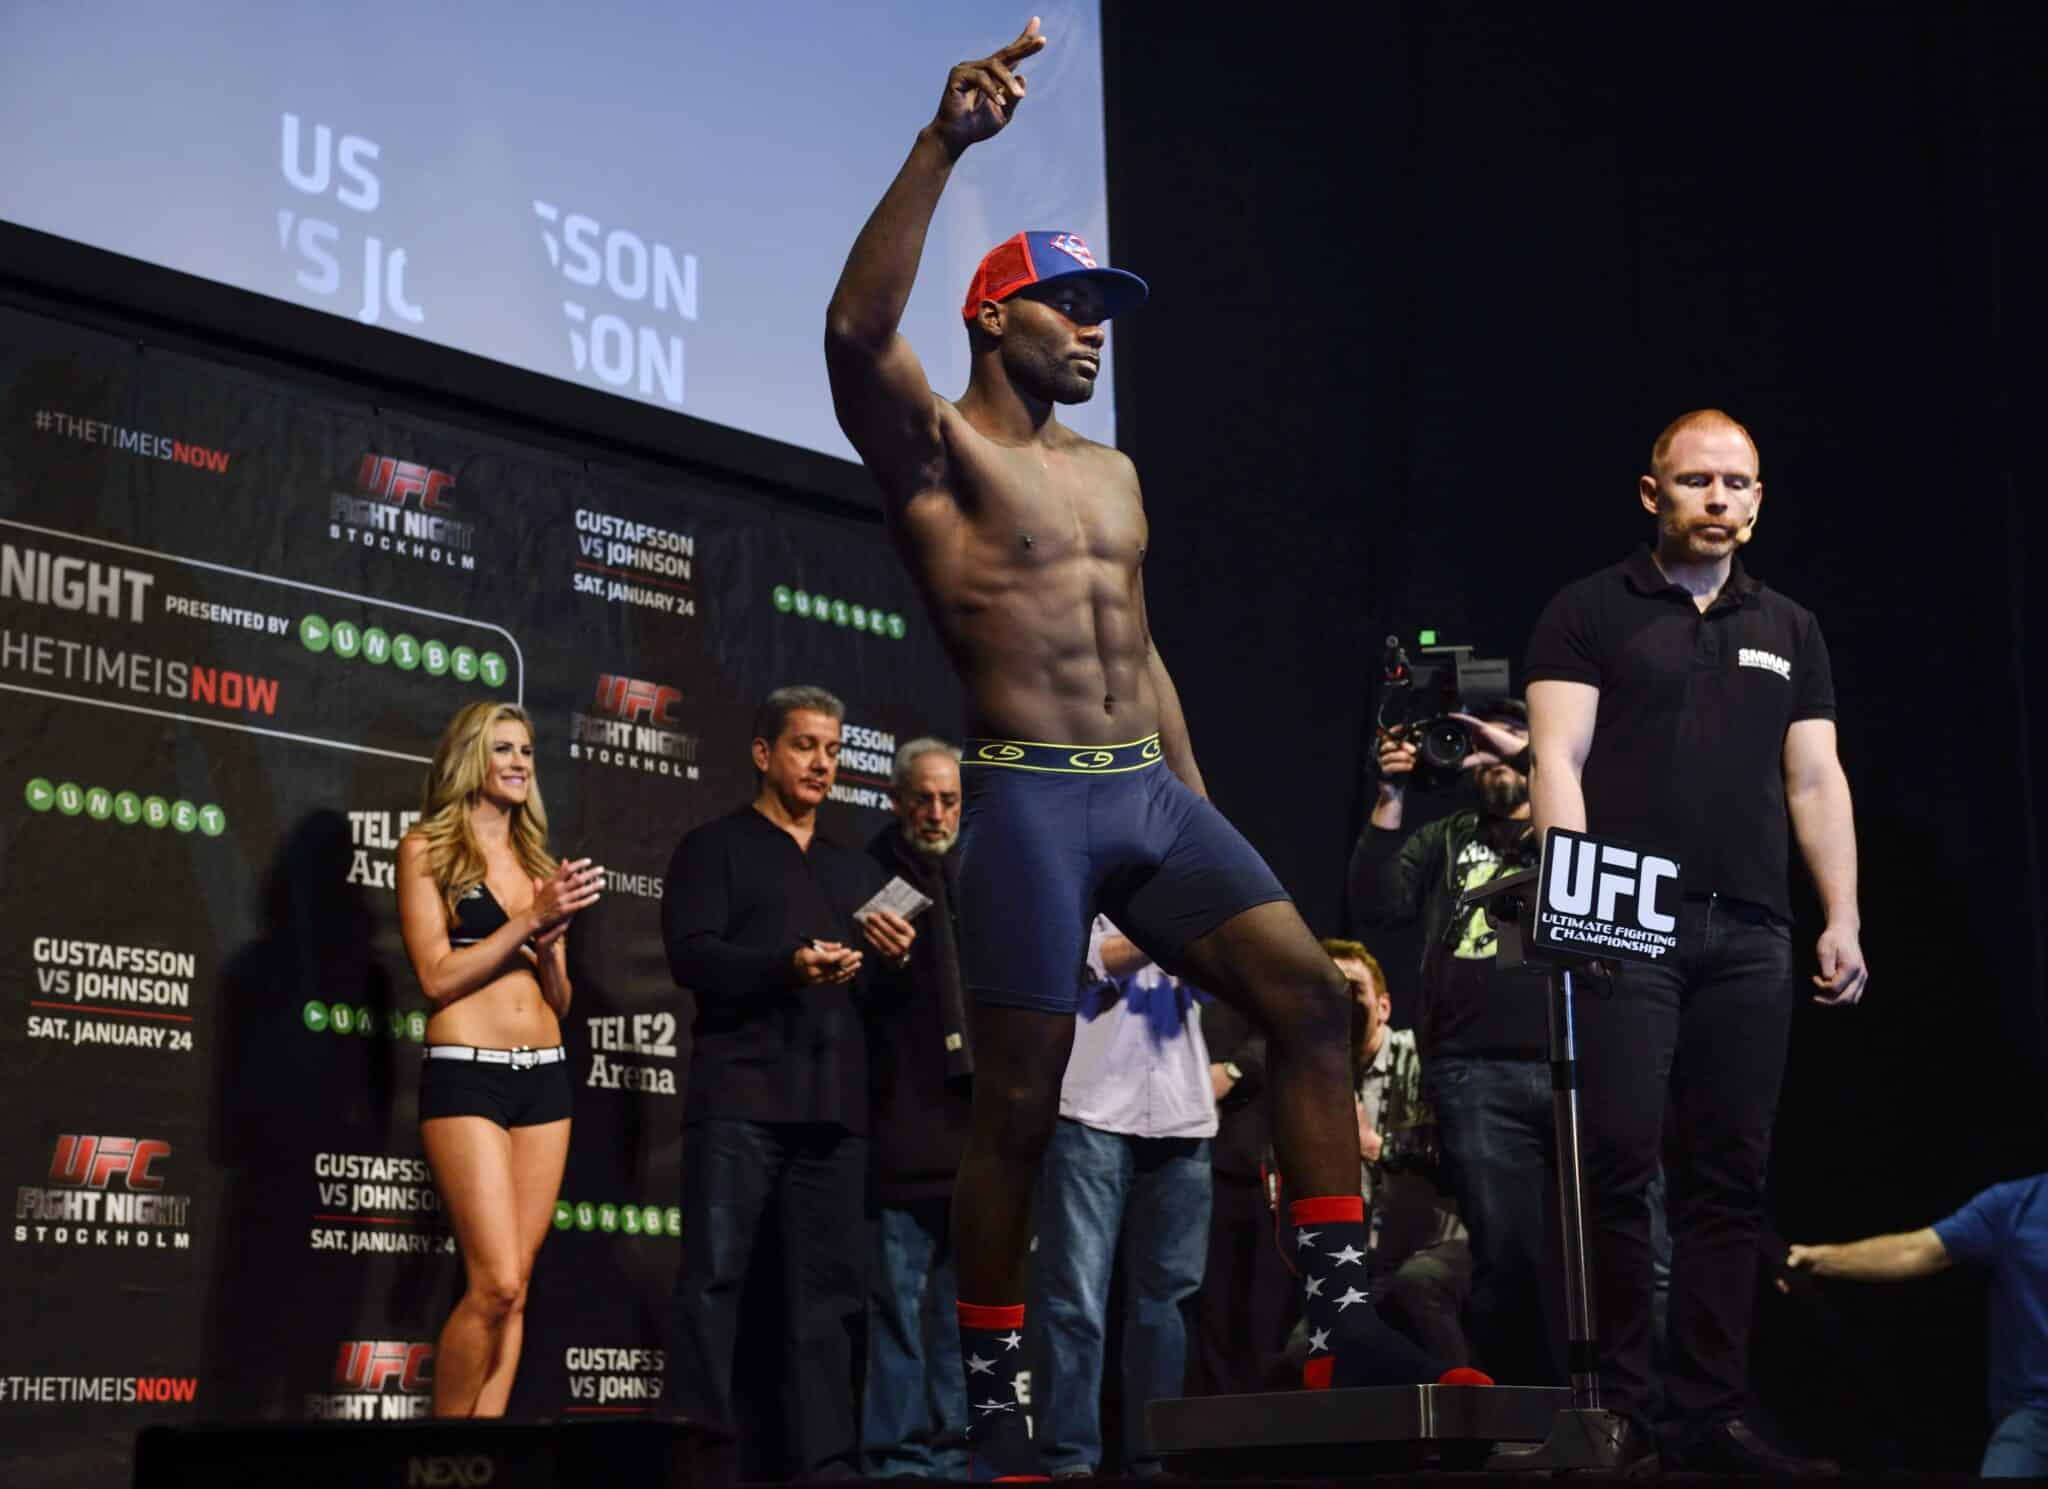 US Anthony 'Rumble' Johnson poses on the scale during the weigh-in for Saturday's UFC light heavyweight championship mixed martial arts bout at Tele2 Arena in Stockholm, Sweden, on January 23, 2015.  AFP PHOTO / TT NEWS AGENCY / Henrik Montgomery /  SWEDEN OUT        (Photo credit should read HENRIK MONTGOMERY/AFP via Getty Images)